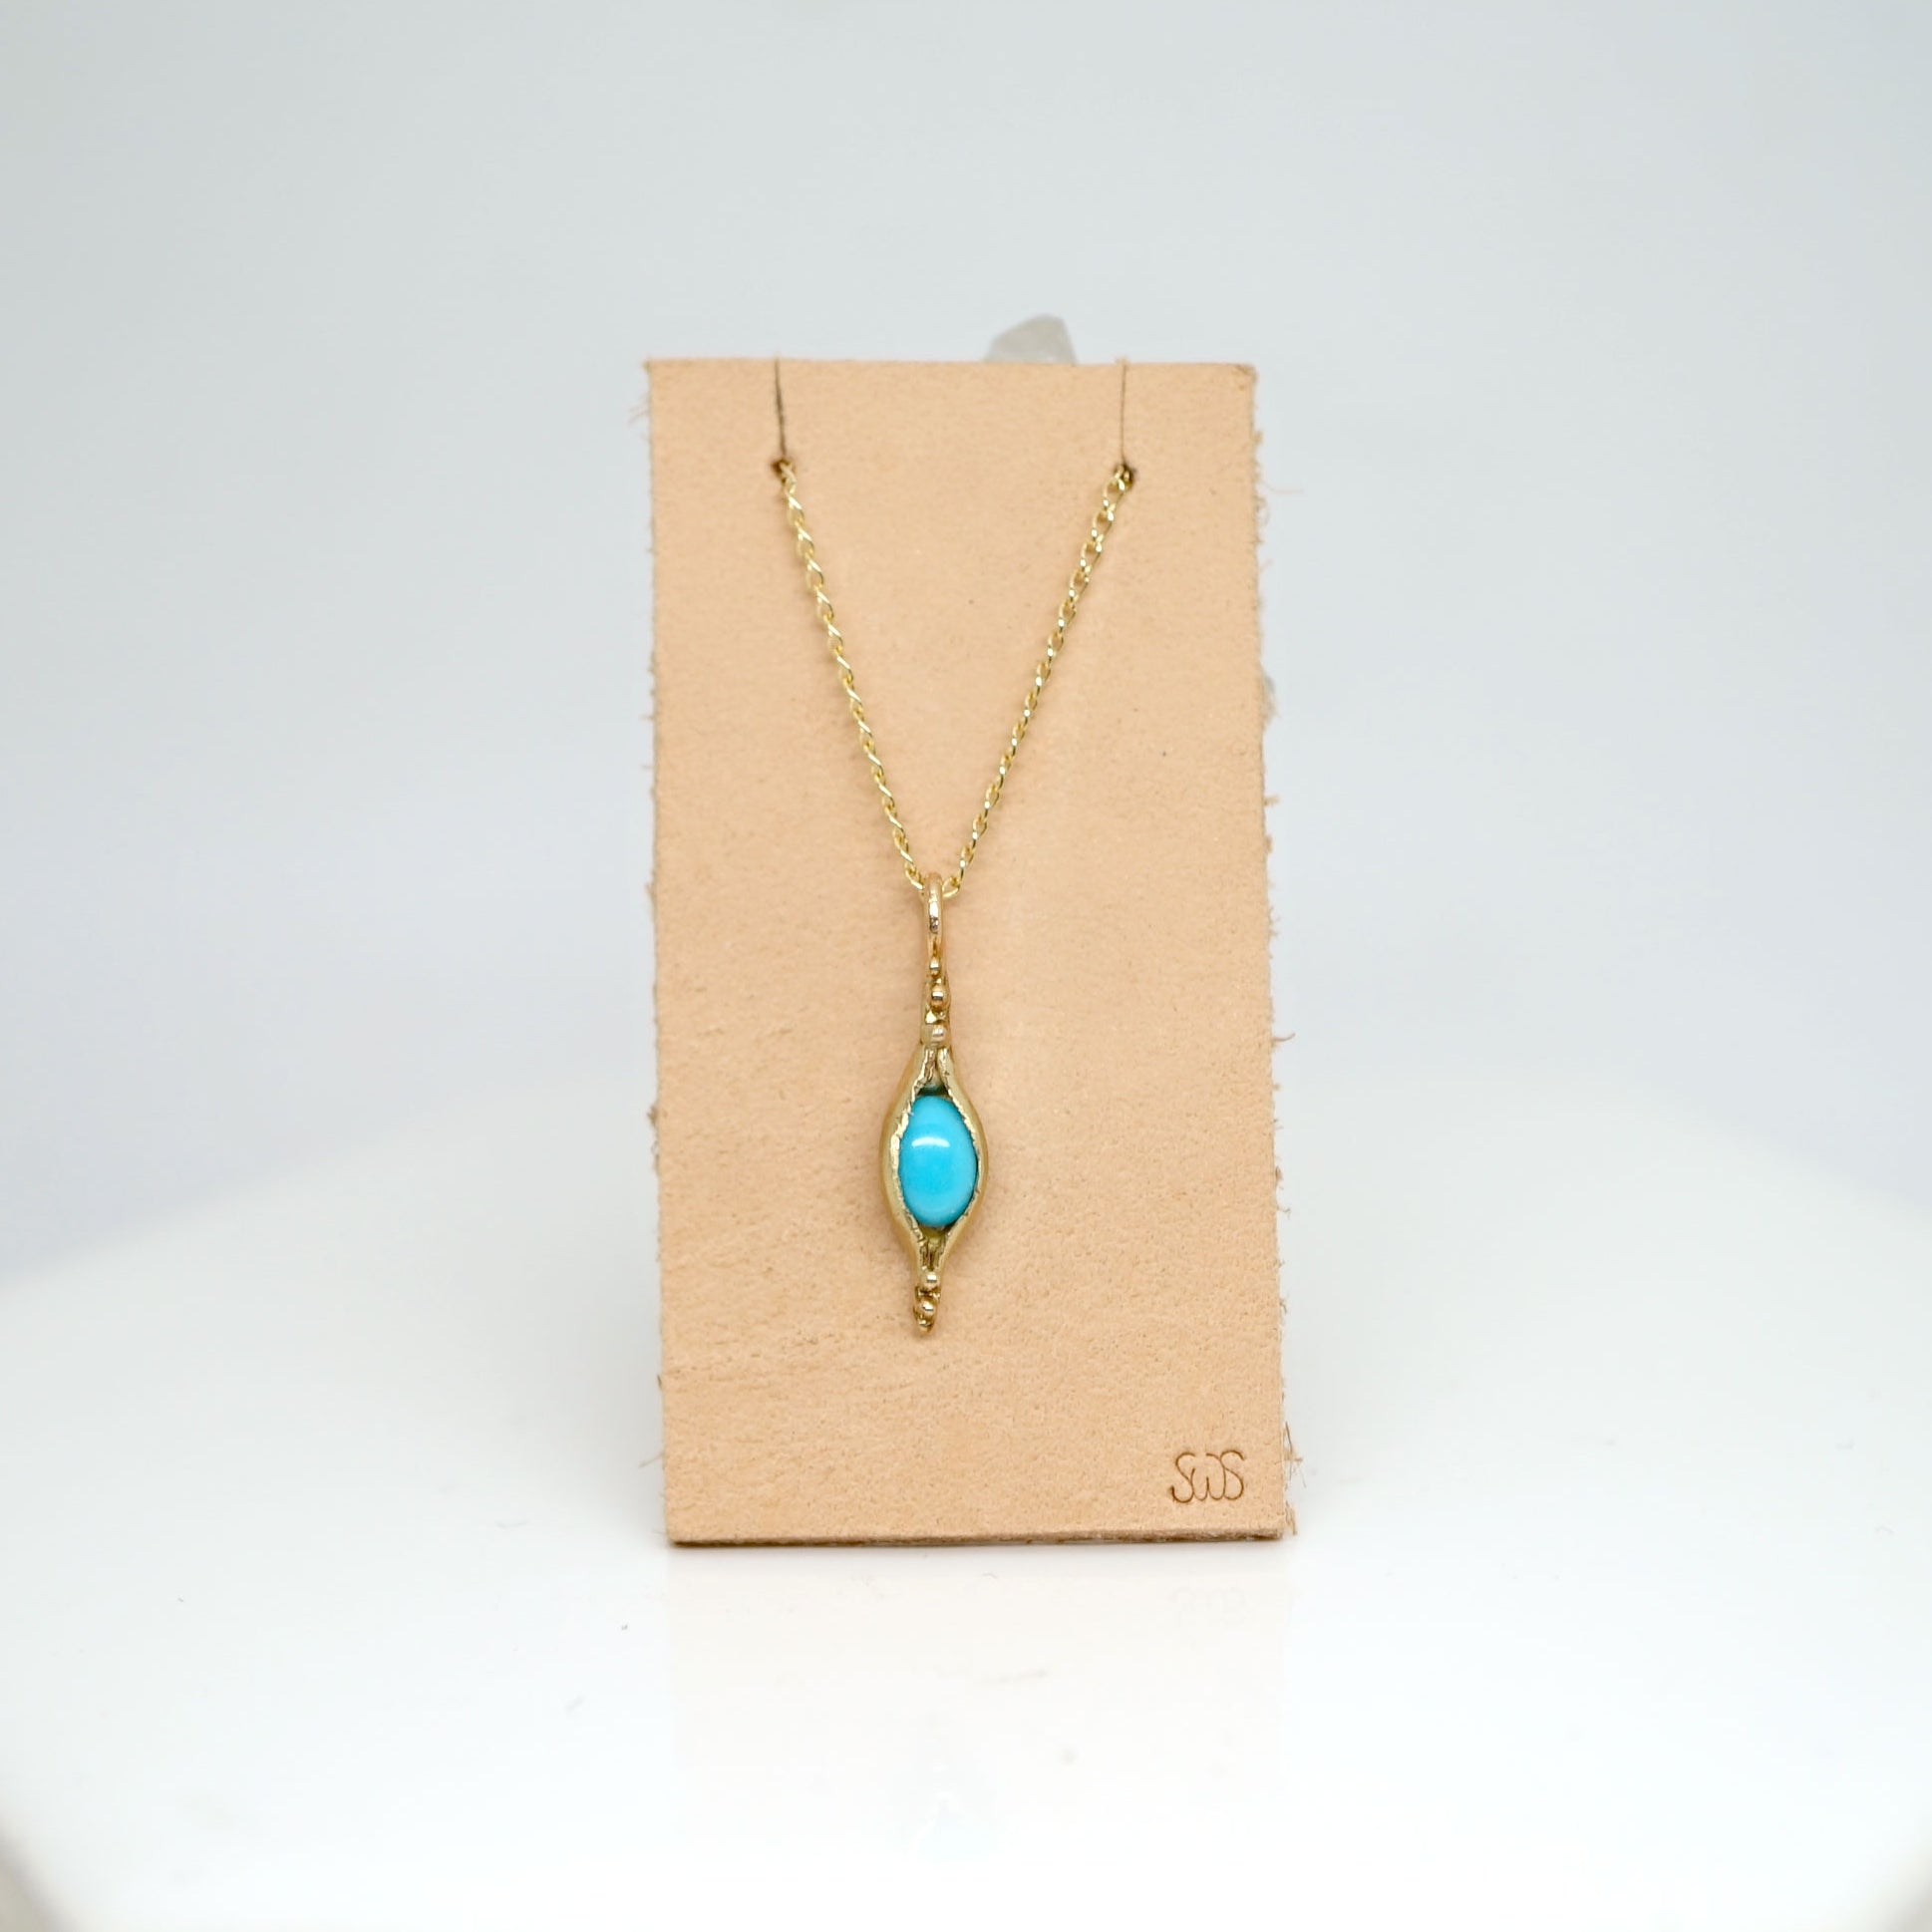 Pod pendant necklace with turquoise